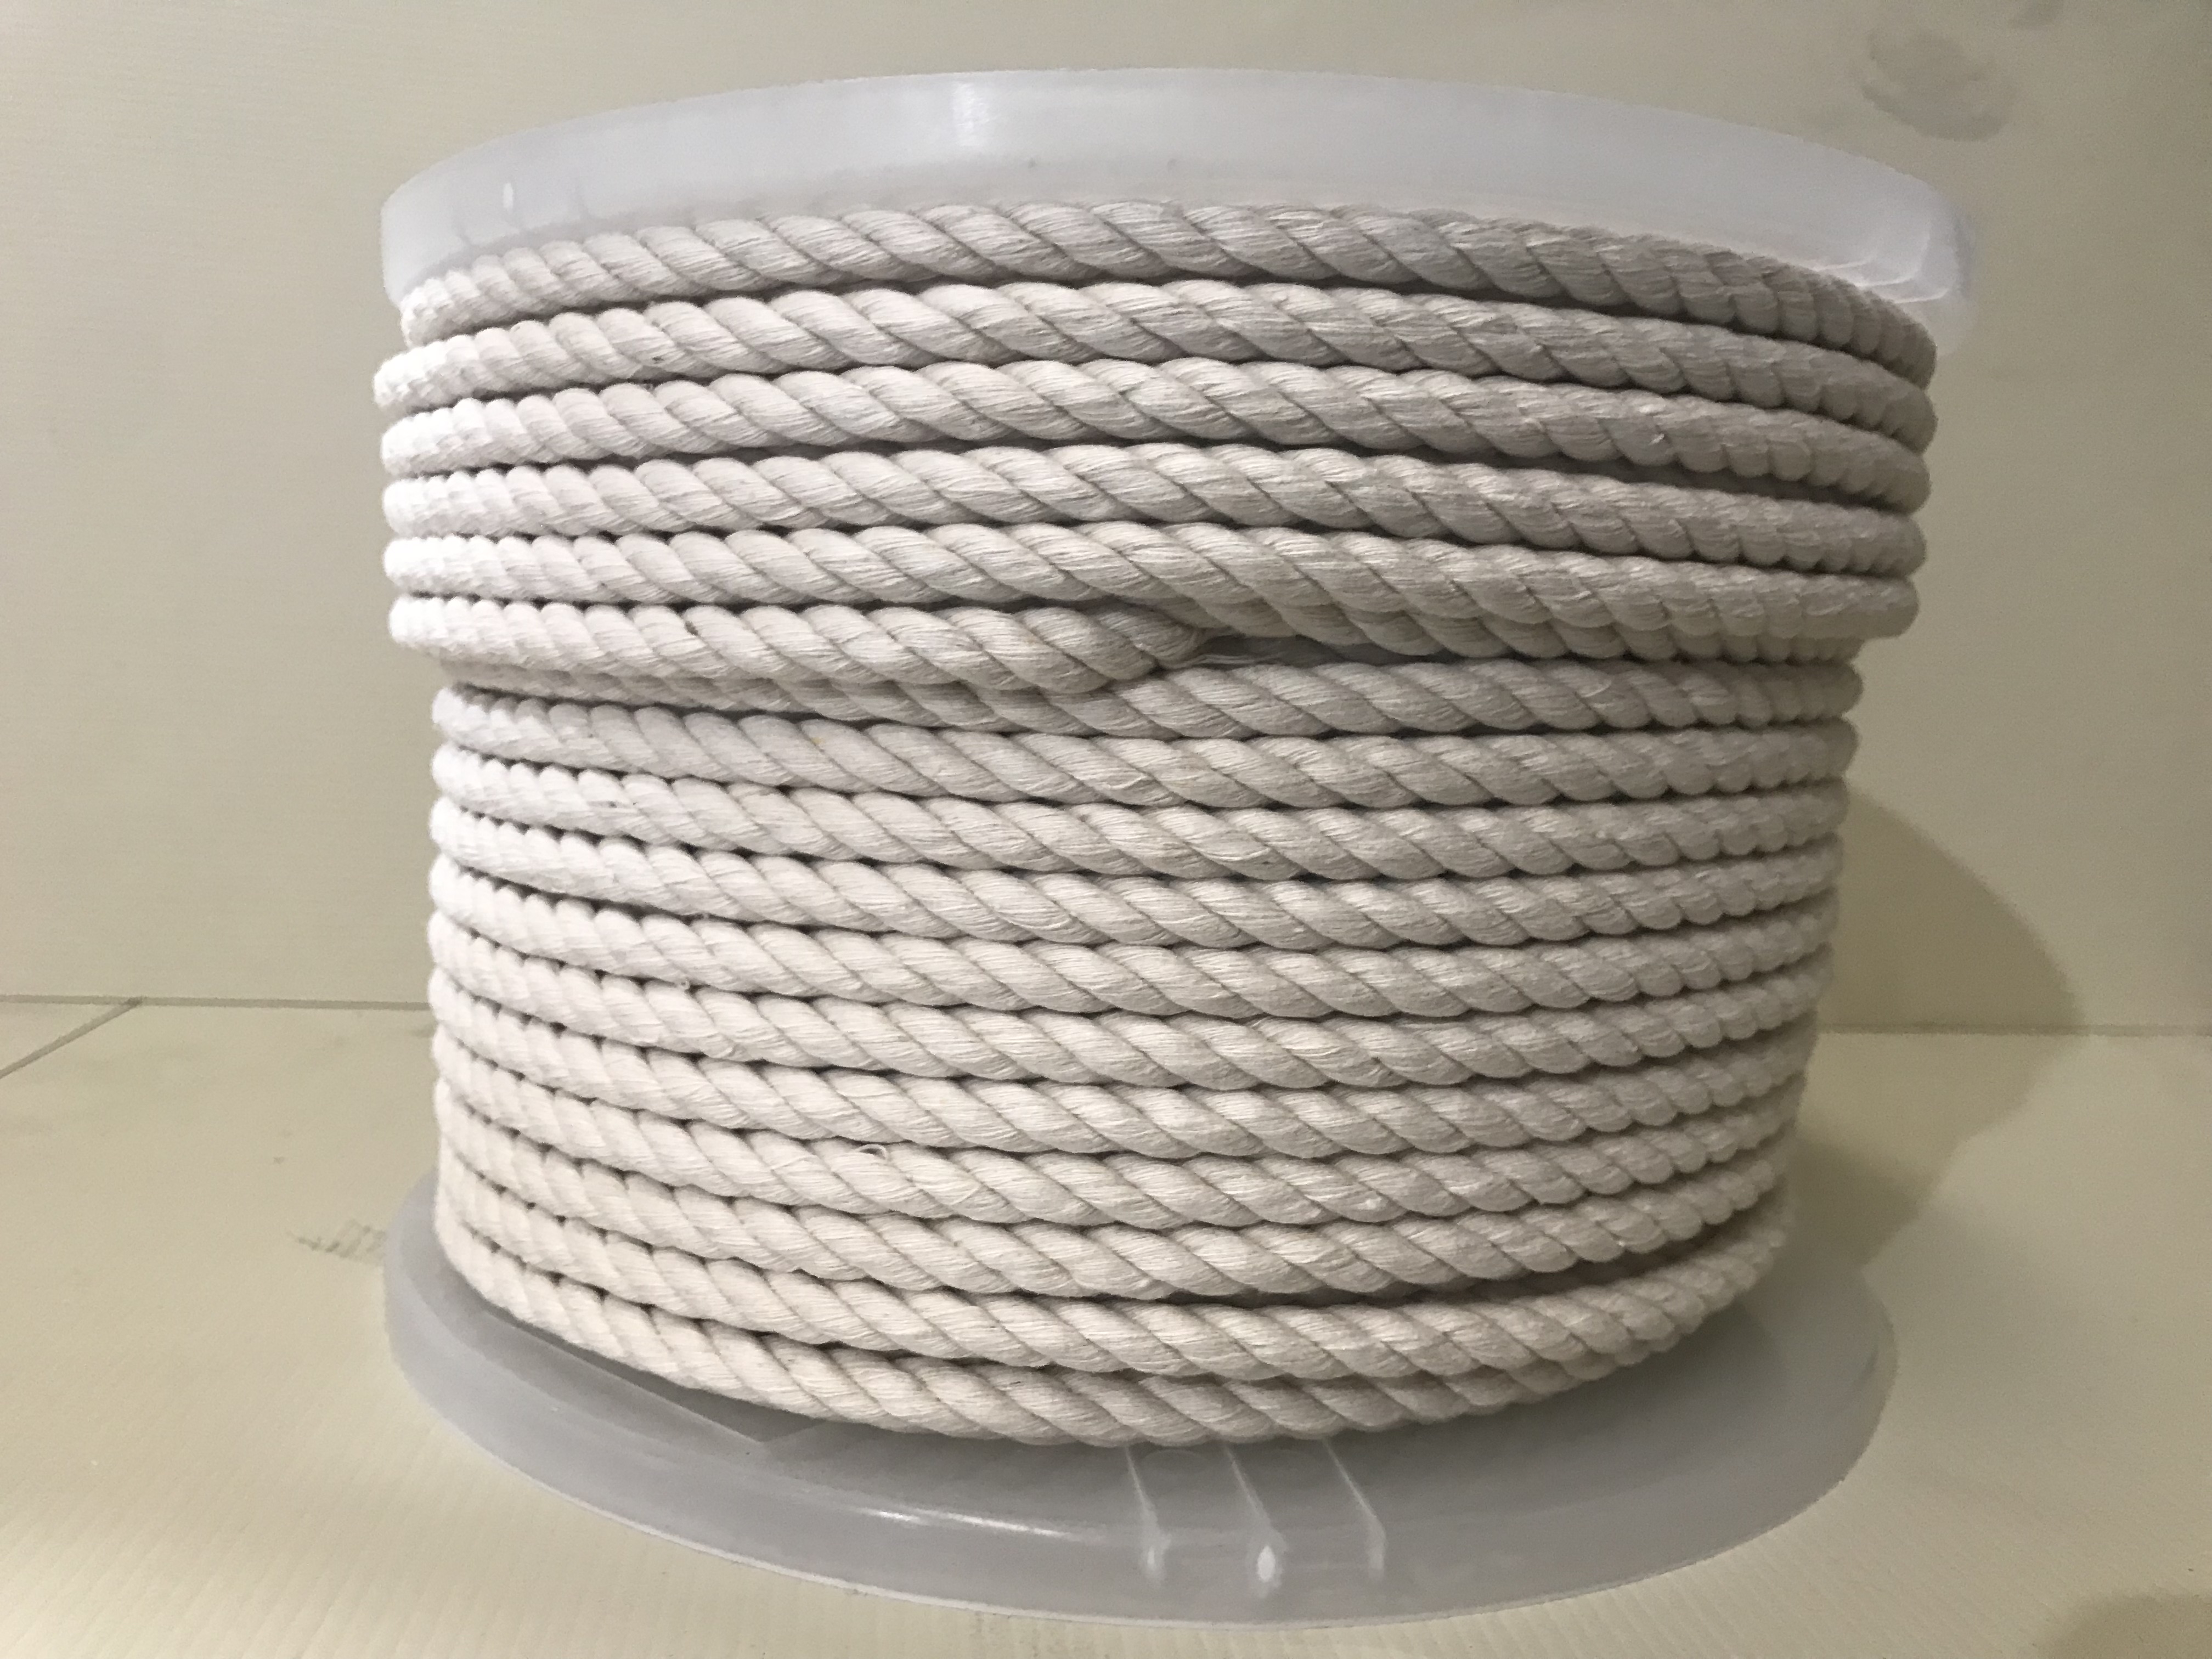 COTTON ROPE 6mm x 100mtrs - Splicing & Cutting